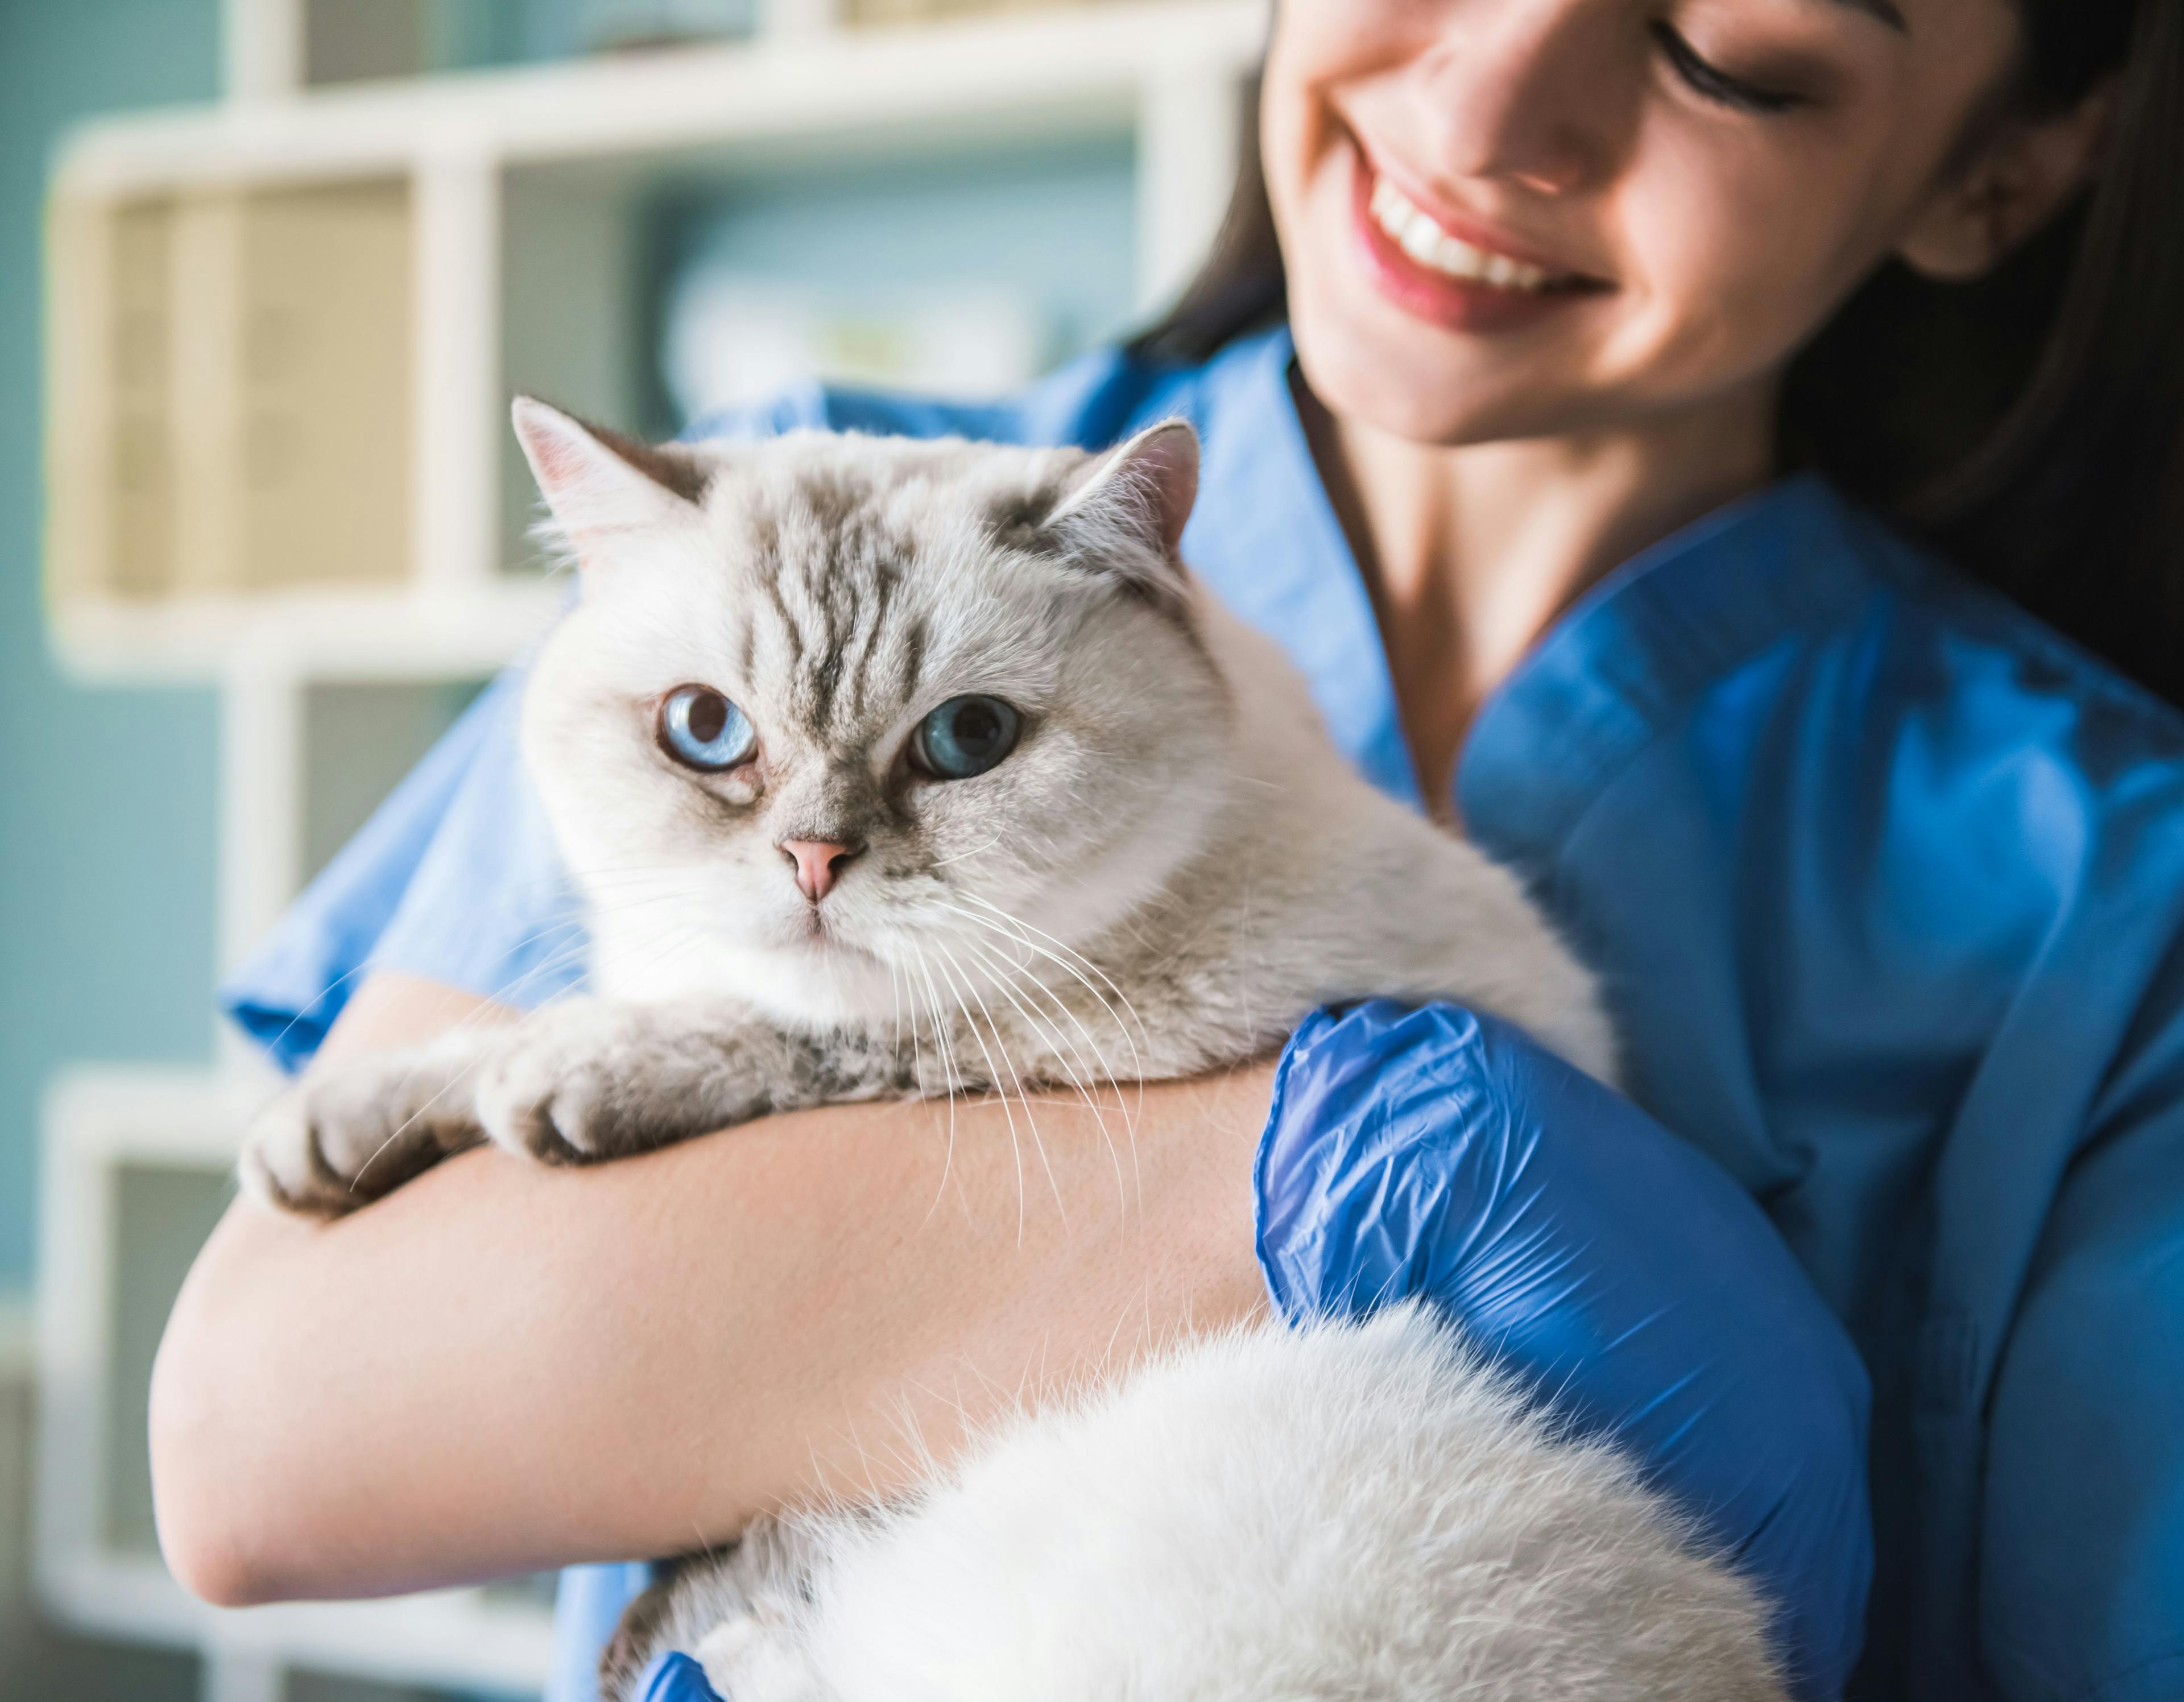 Study highlights opportunities to promote veterinary practice productivity  